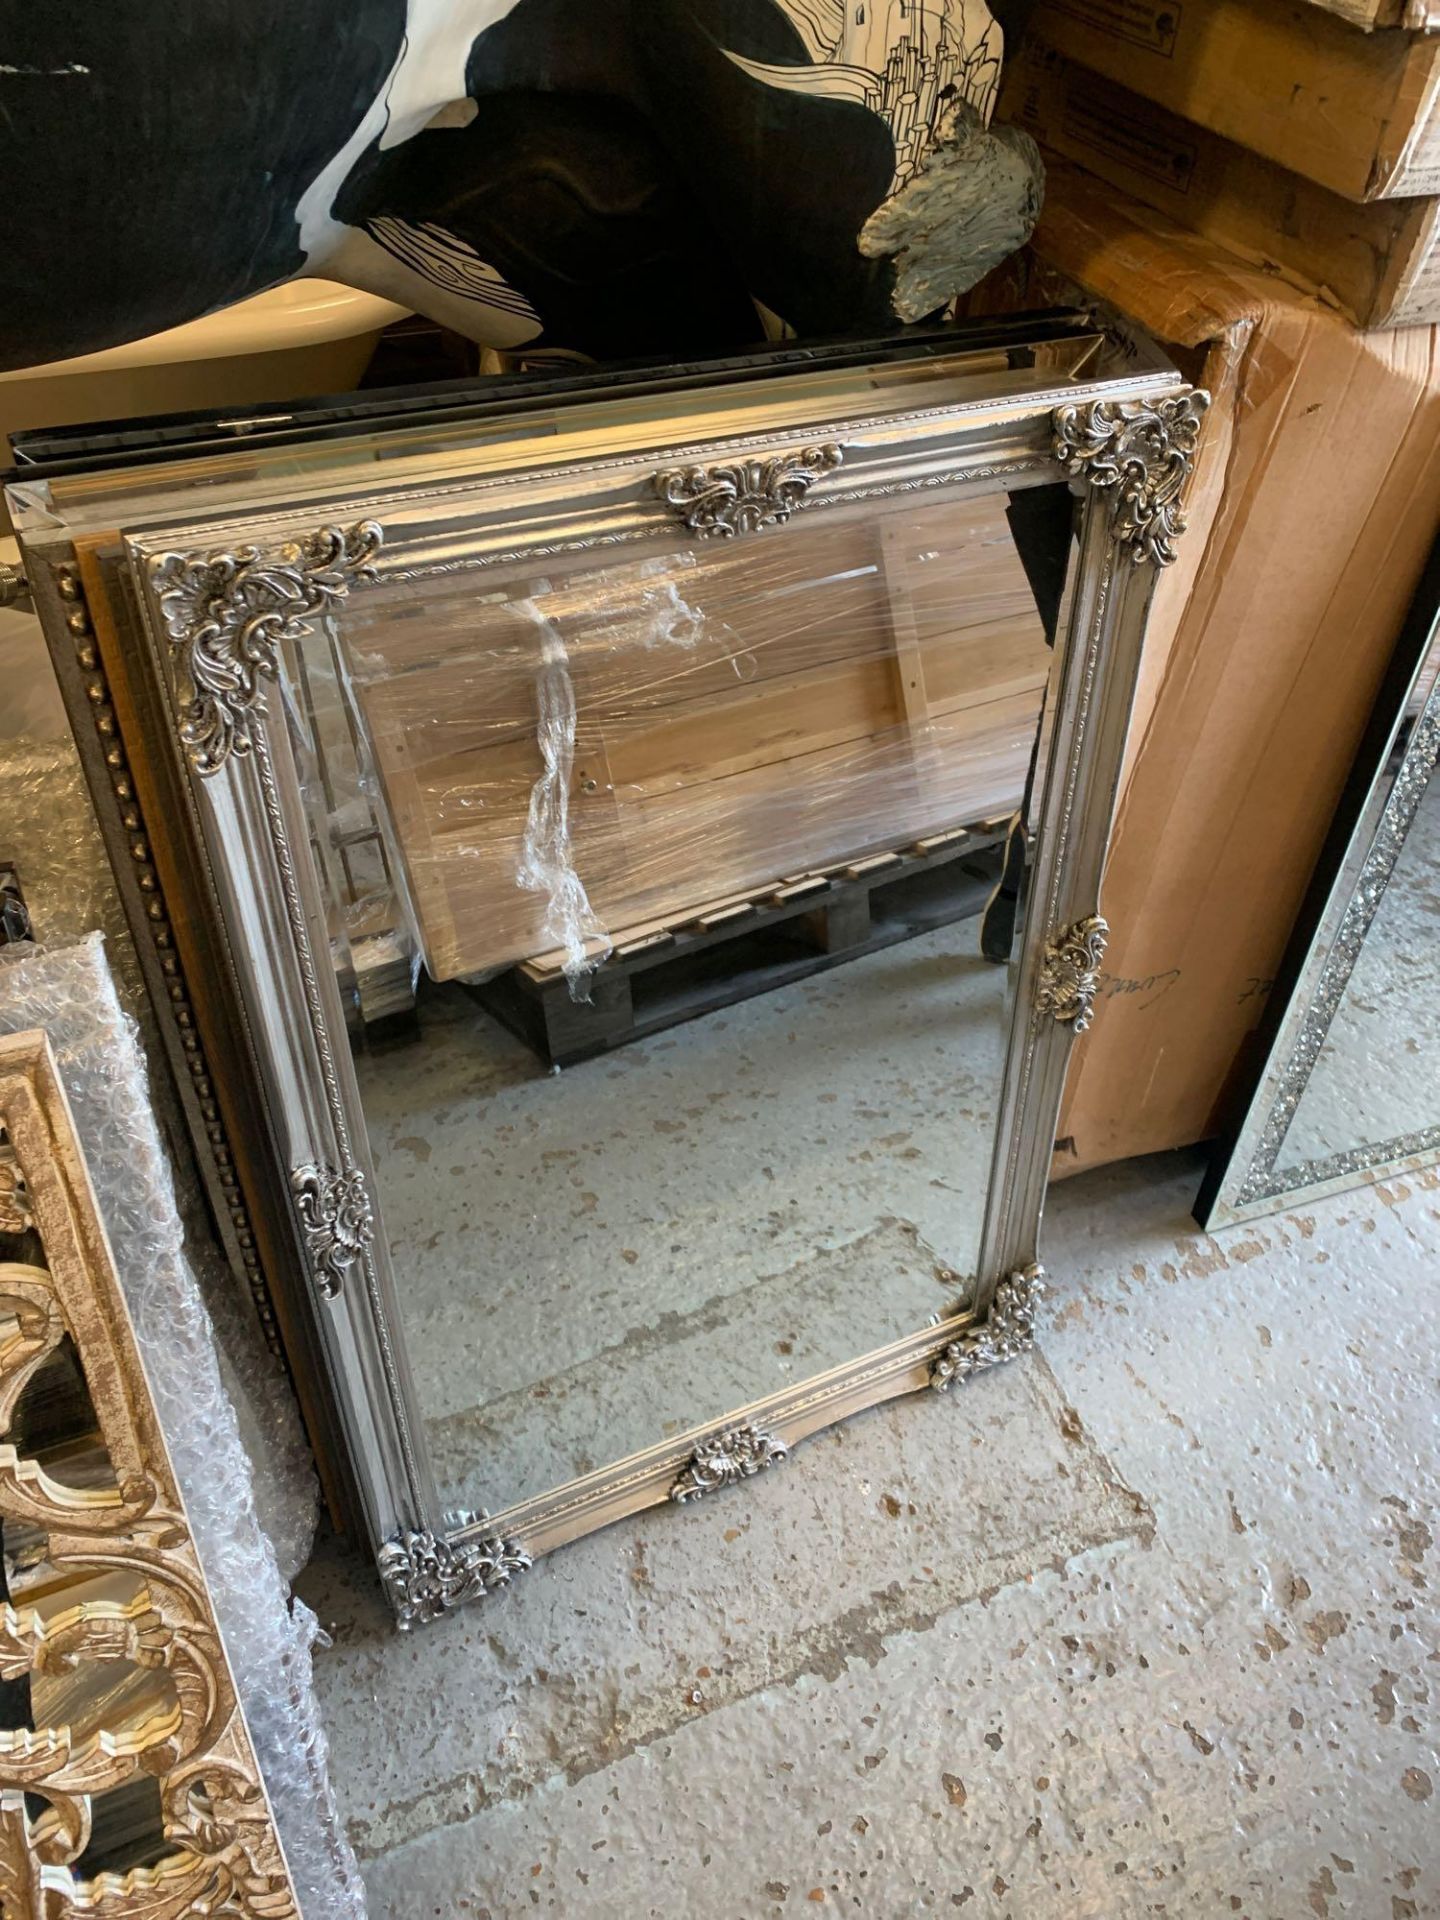 Fiennes Rectangle Mirror Silver 610 X 920mm This Vintage Inspired Piece Rectangle Mirror With Its